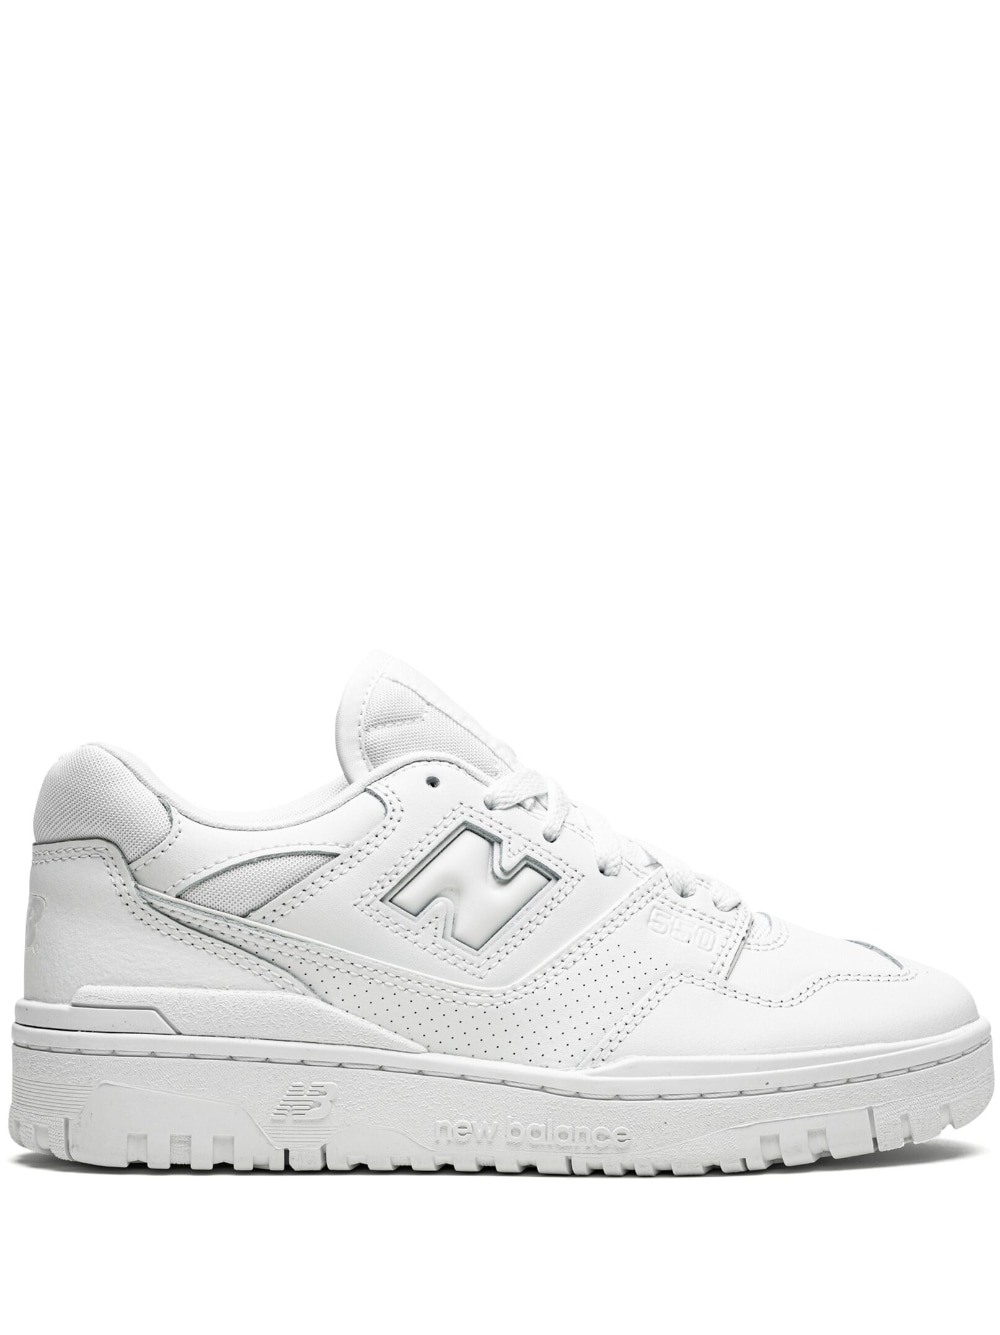 New Balance 550 "Triple White" low-top sneakers